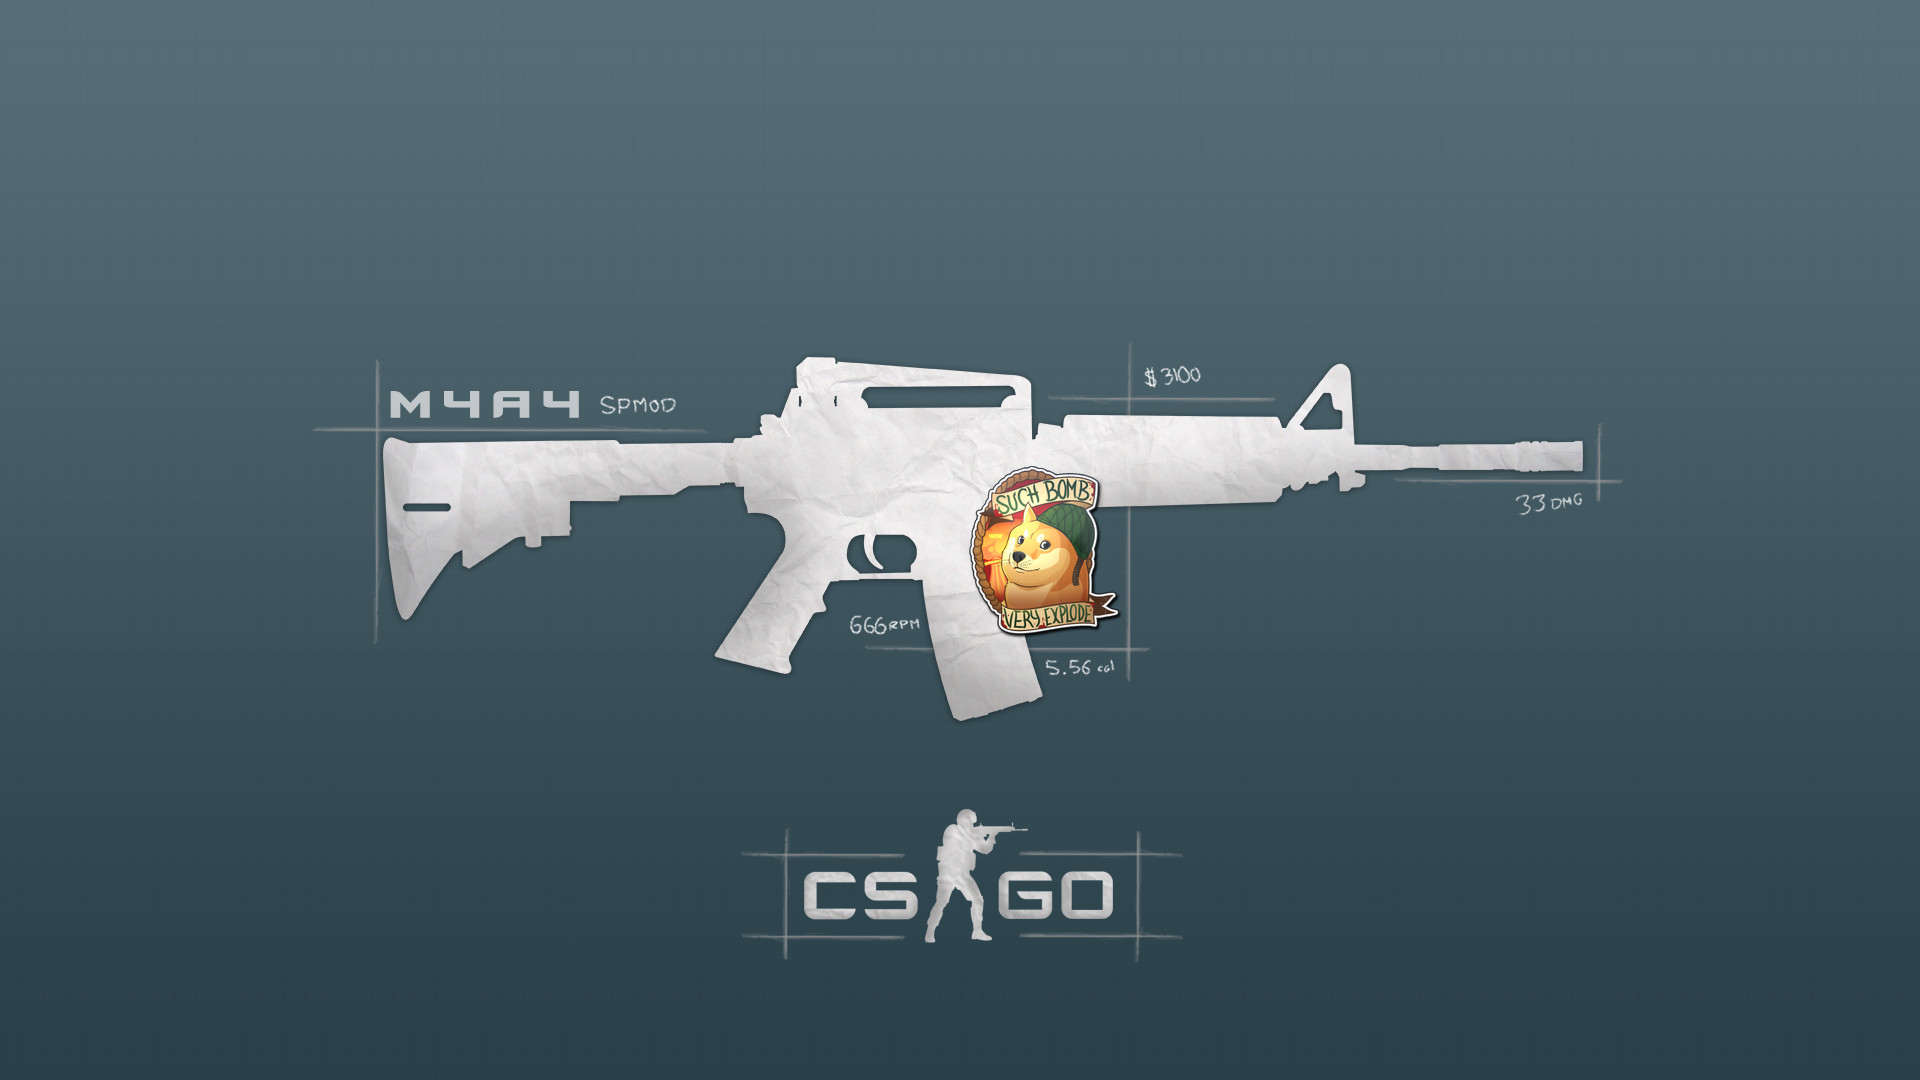 1920x1080 Peasantry Free[OC] I Couldn't find a minimalist CS:GO wallpaper so I made  one, thought I would share. (I did not make the doge sticker) ...